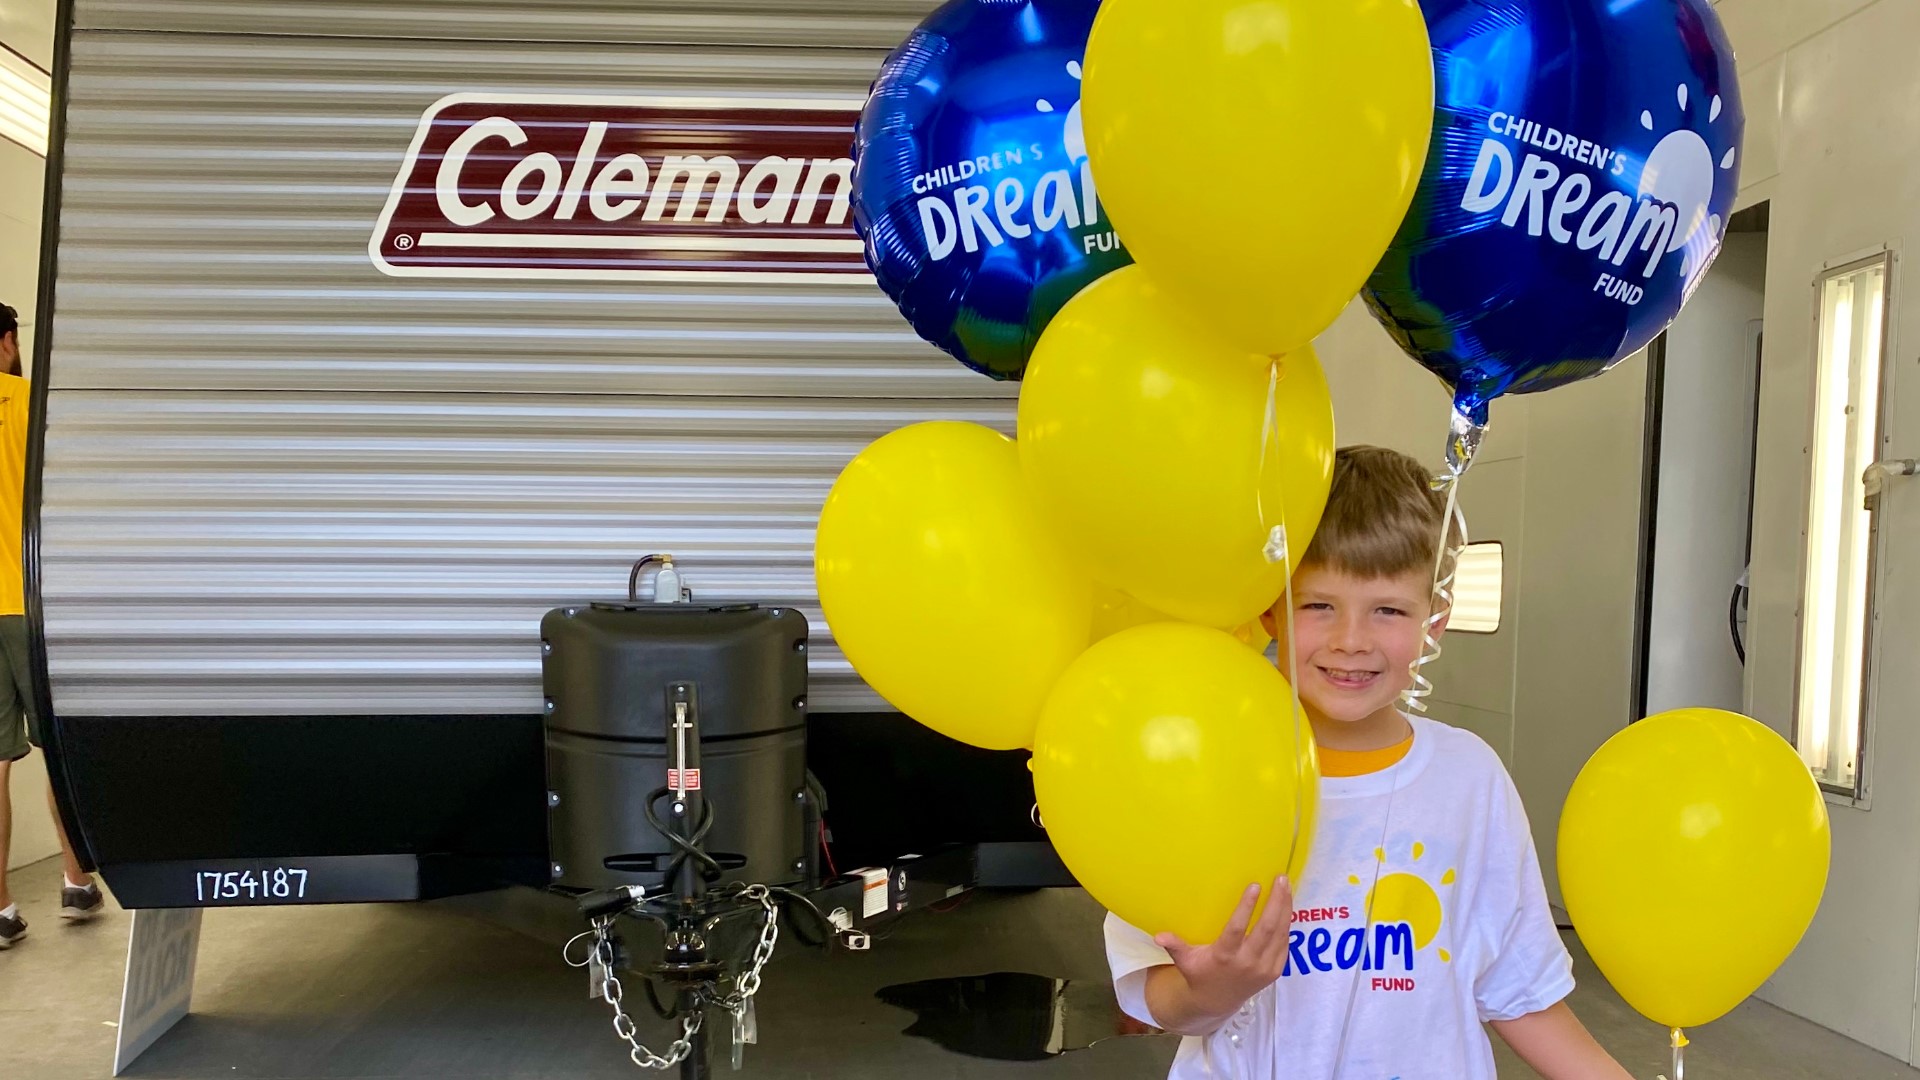 Landon Thorpe received an outfitted trailer from Camping World and the Children's Dream Fund.